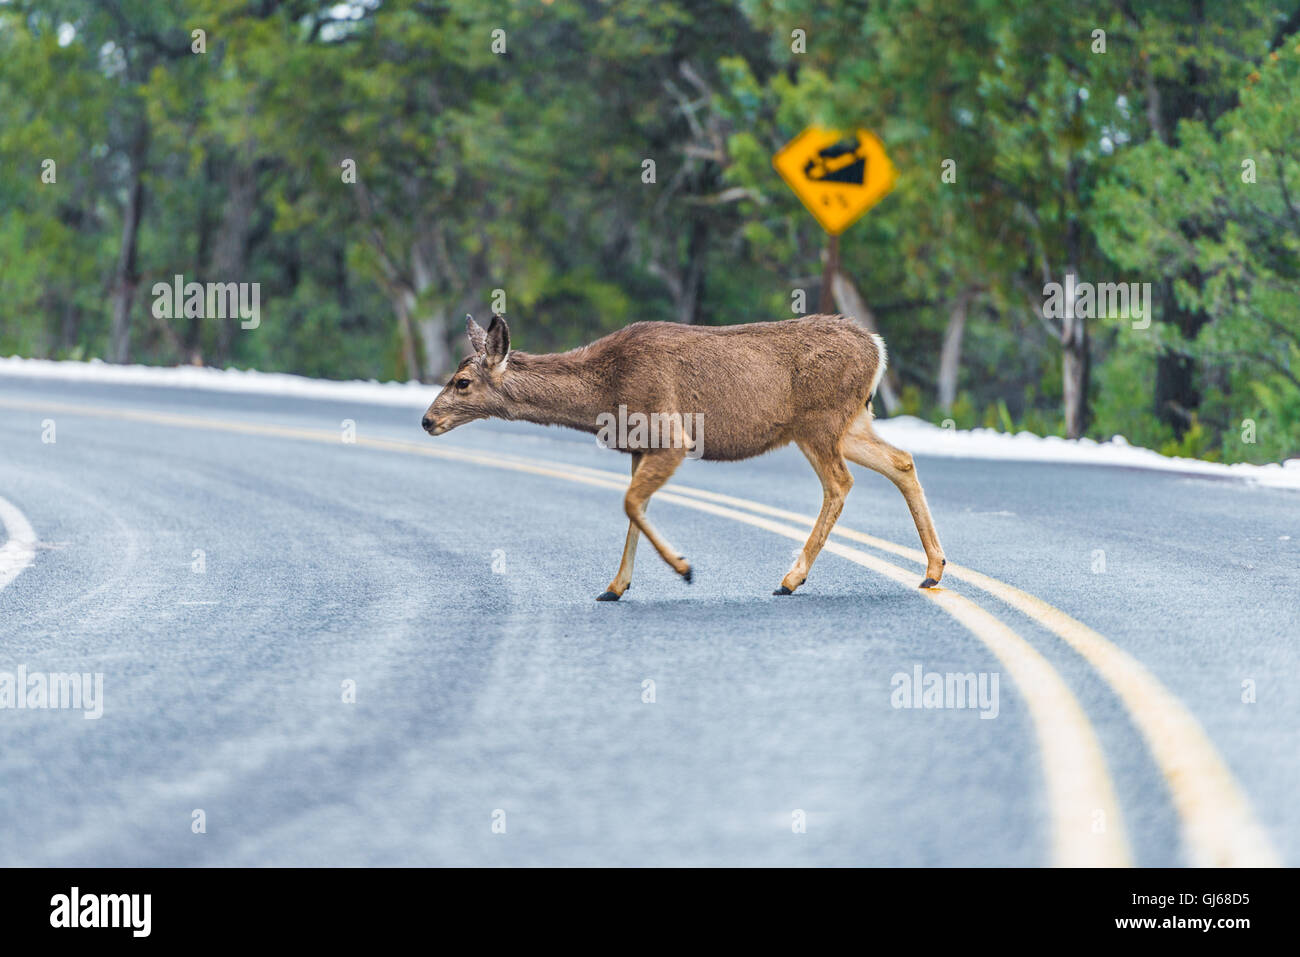 Elk walking on the road in the winter Stock Photo